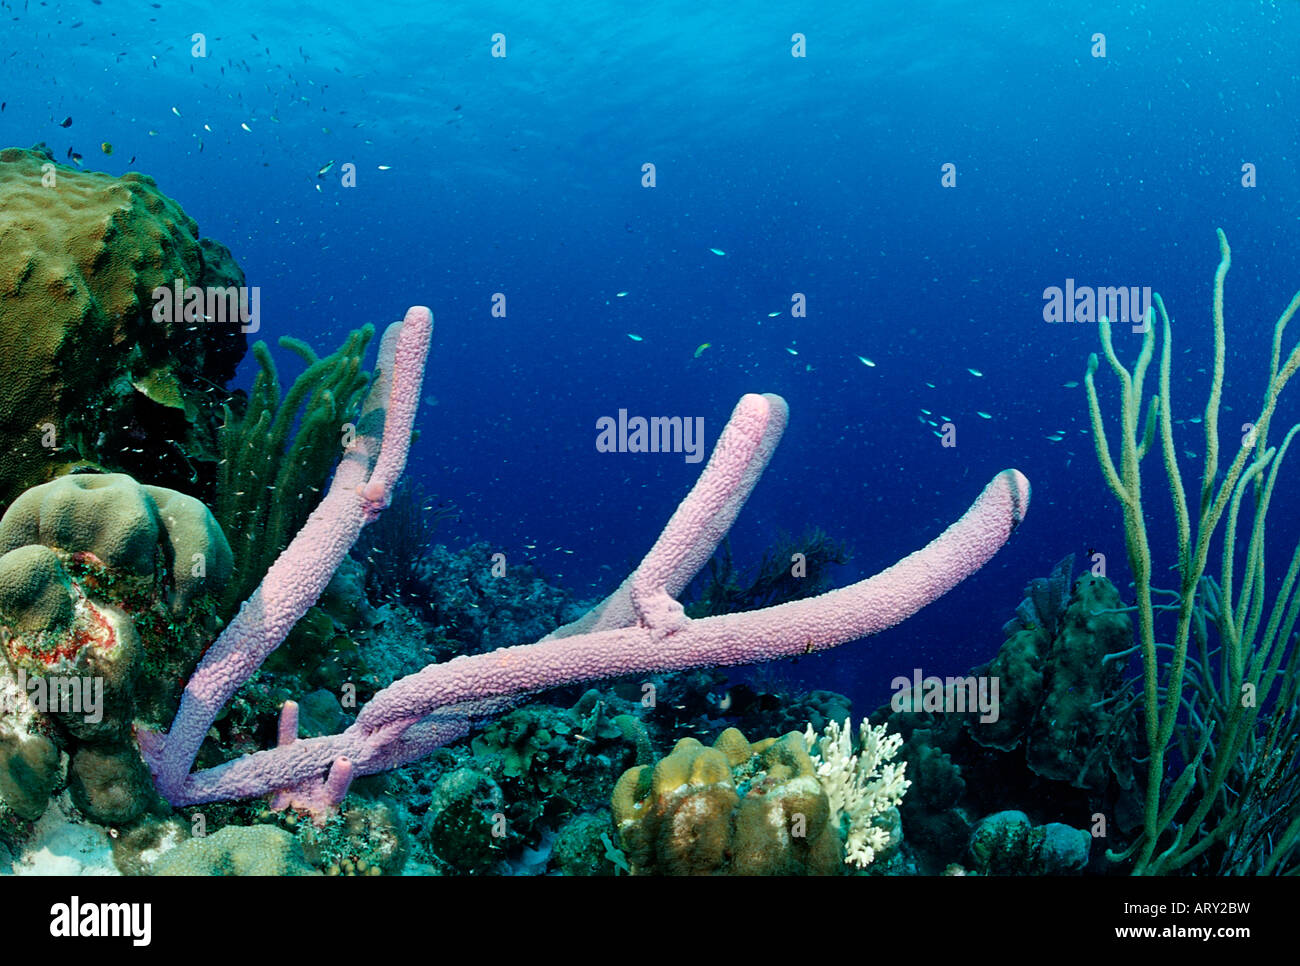 Coral Reef with Sponge Caribbean Sea Belize Stock Photo